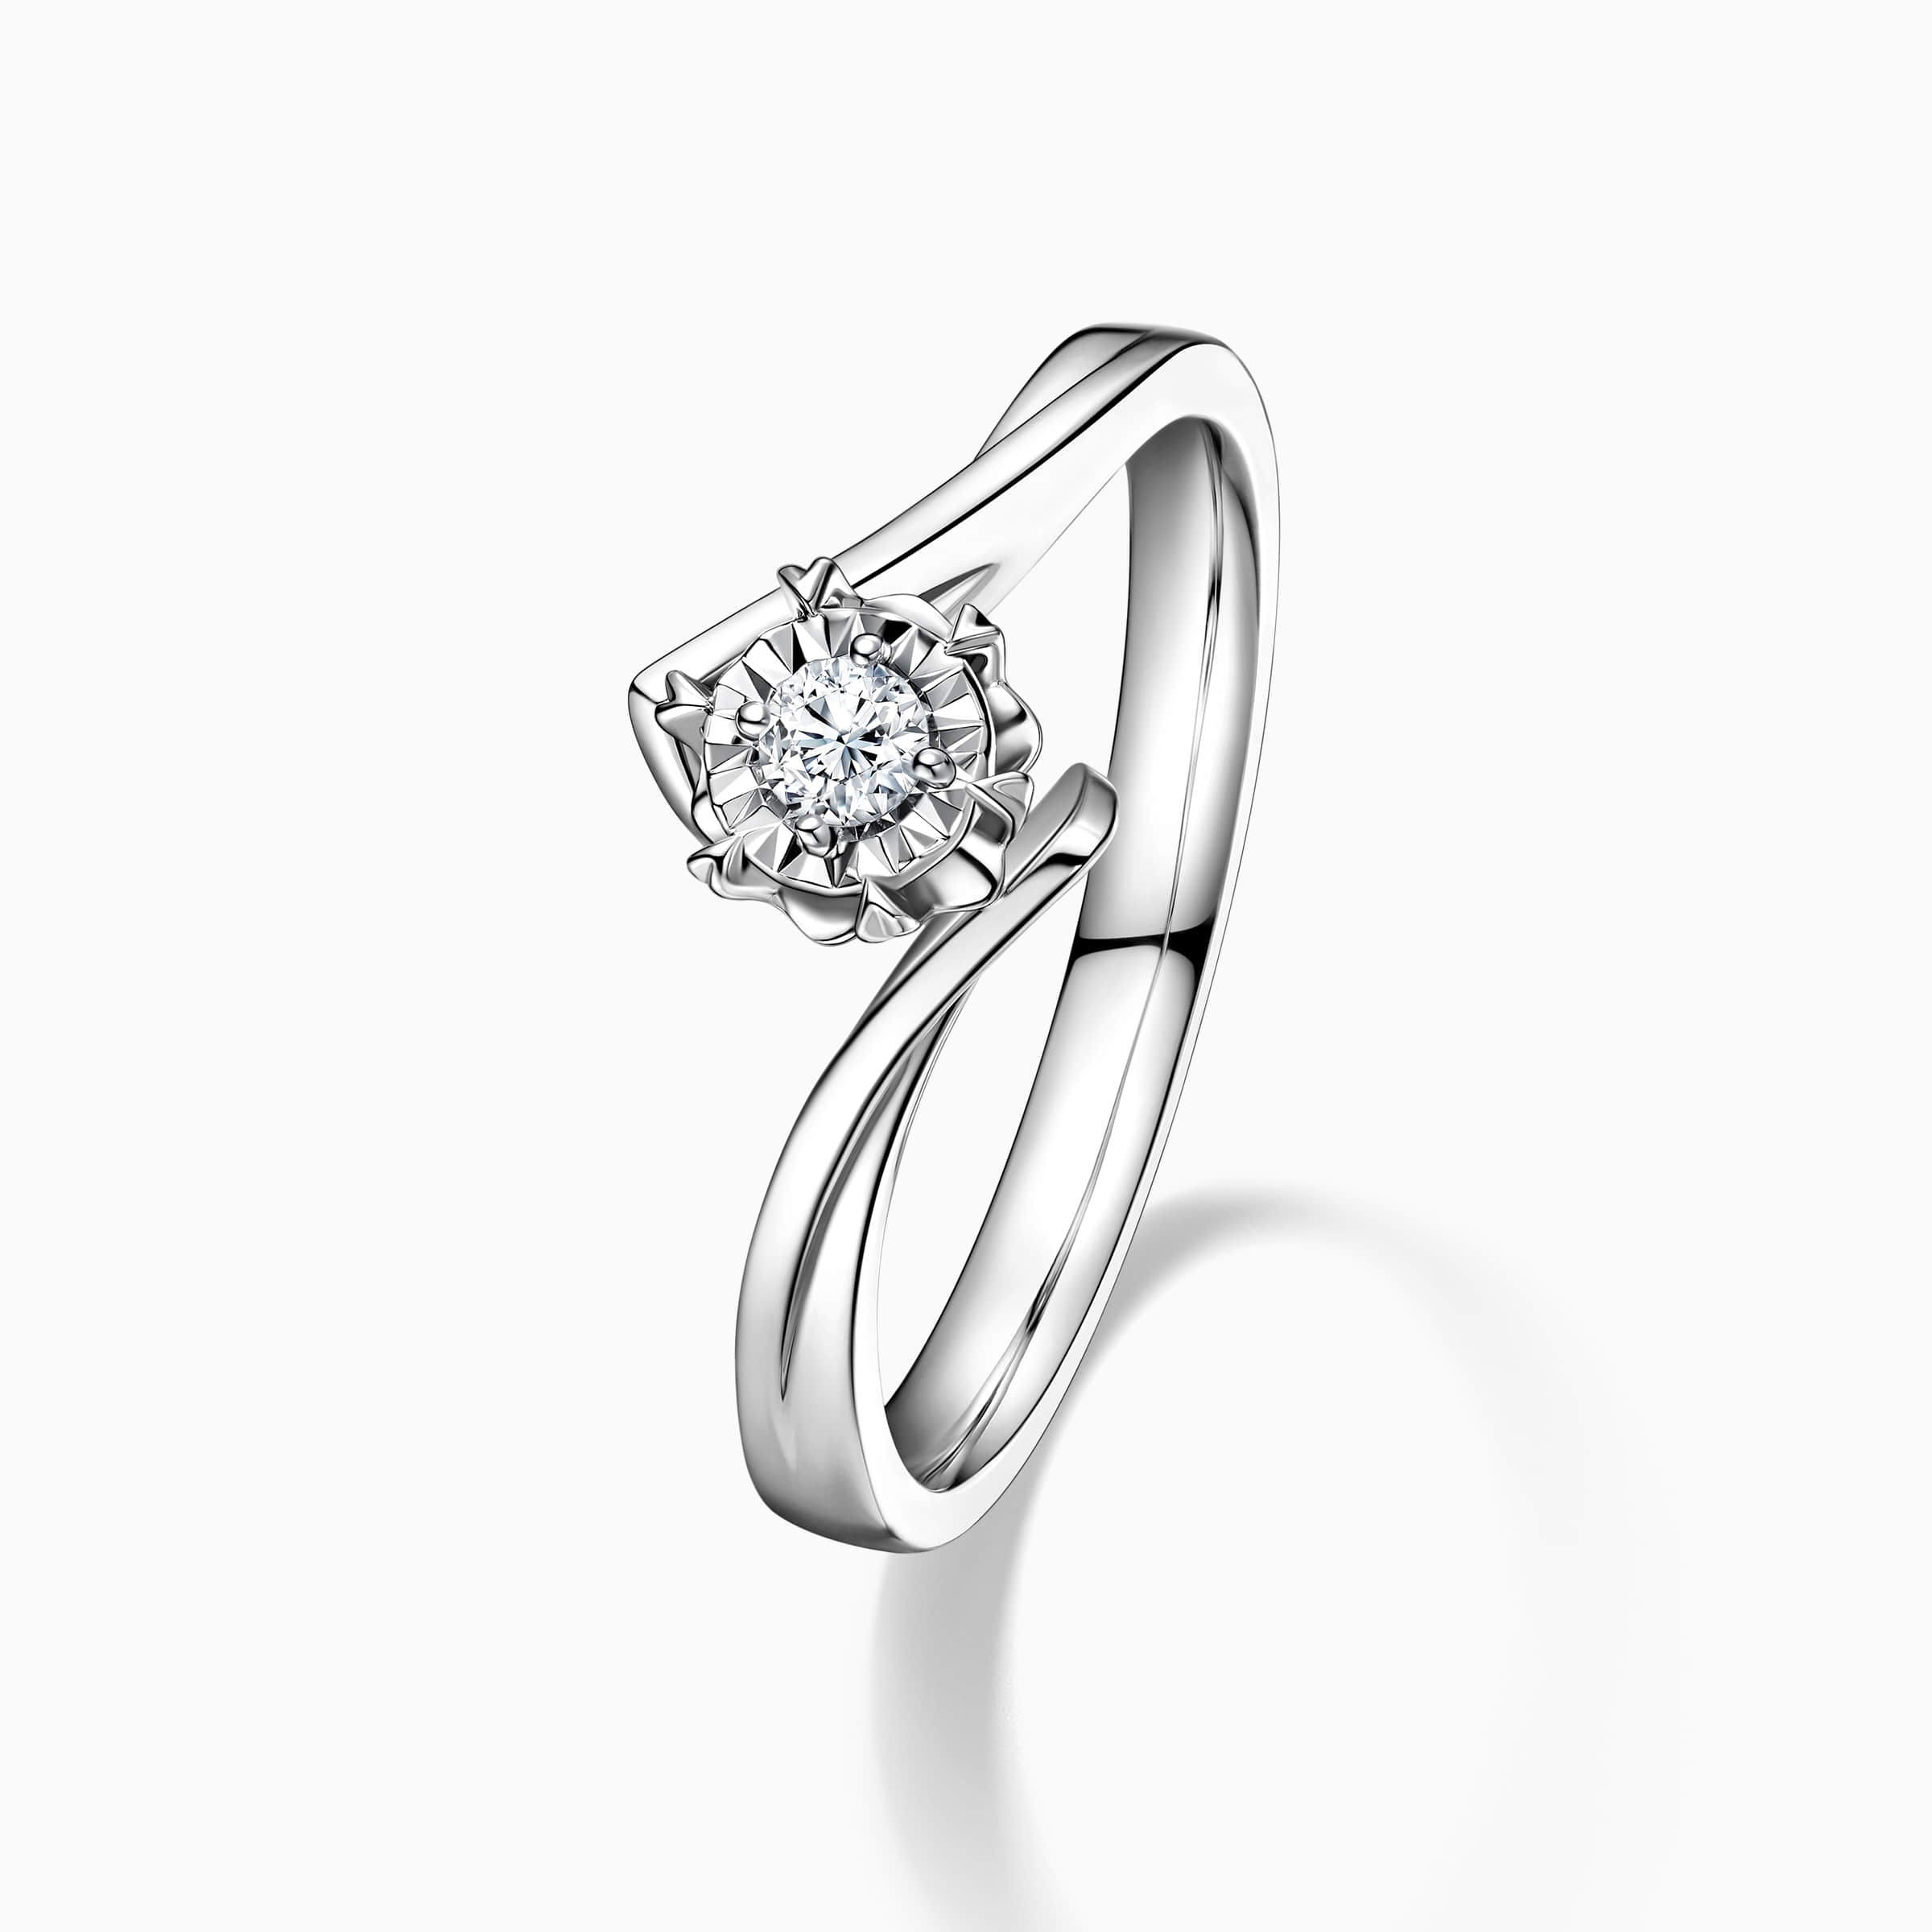 Darry Ring flower diamond promise ring side view